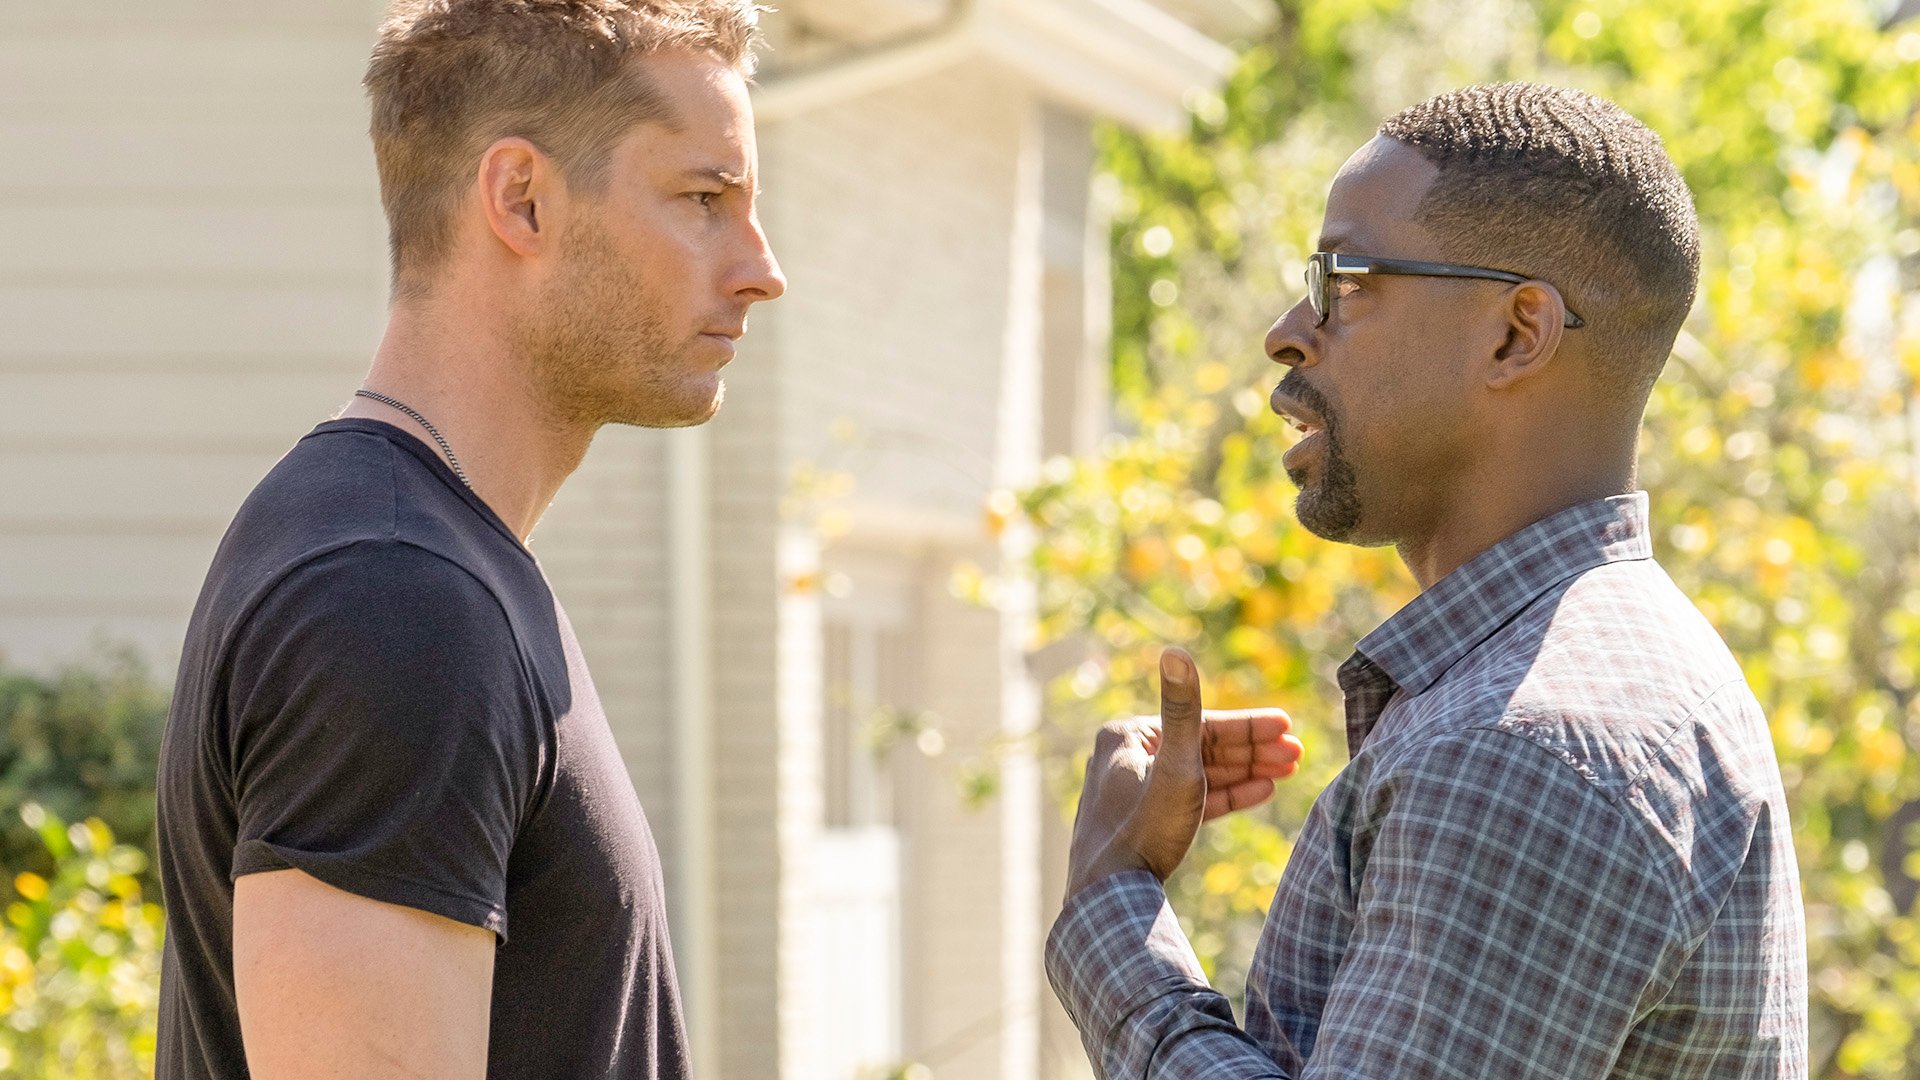 Justin Hartley as Kevin, Sterling K. Brown as Randall on 'This Is Us' Season 4